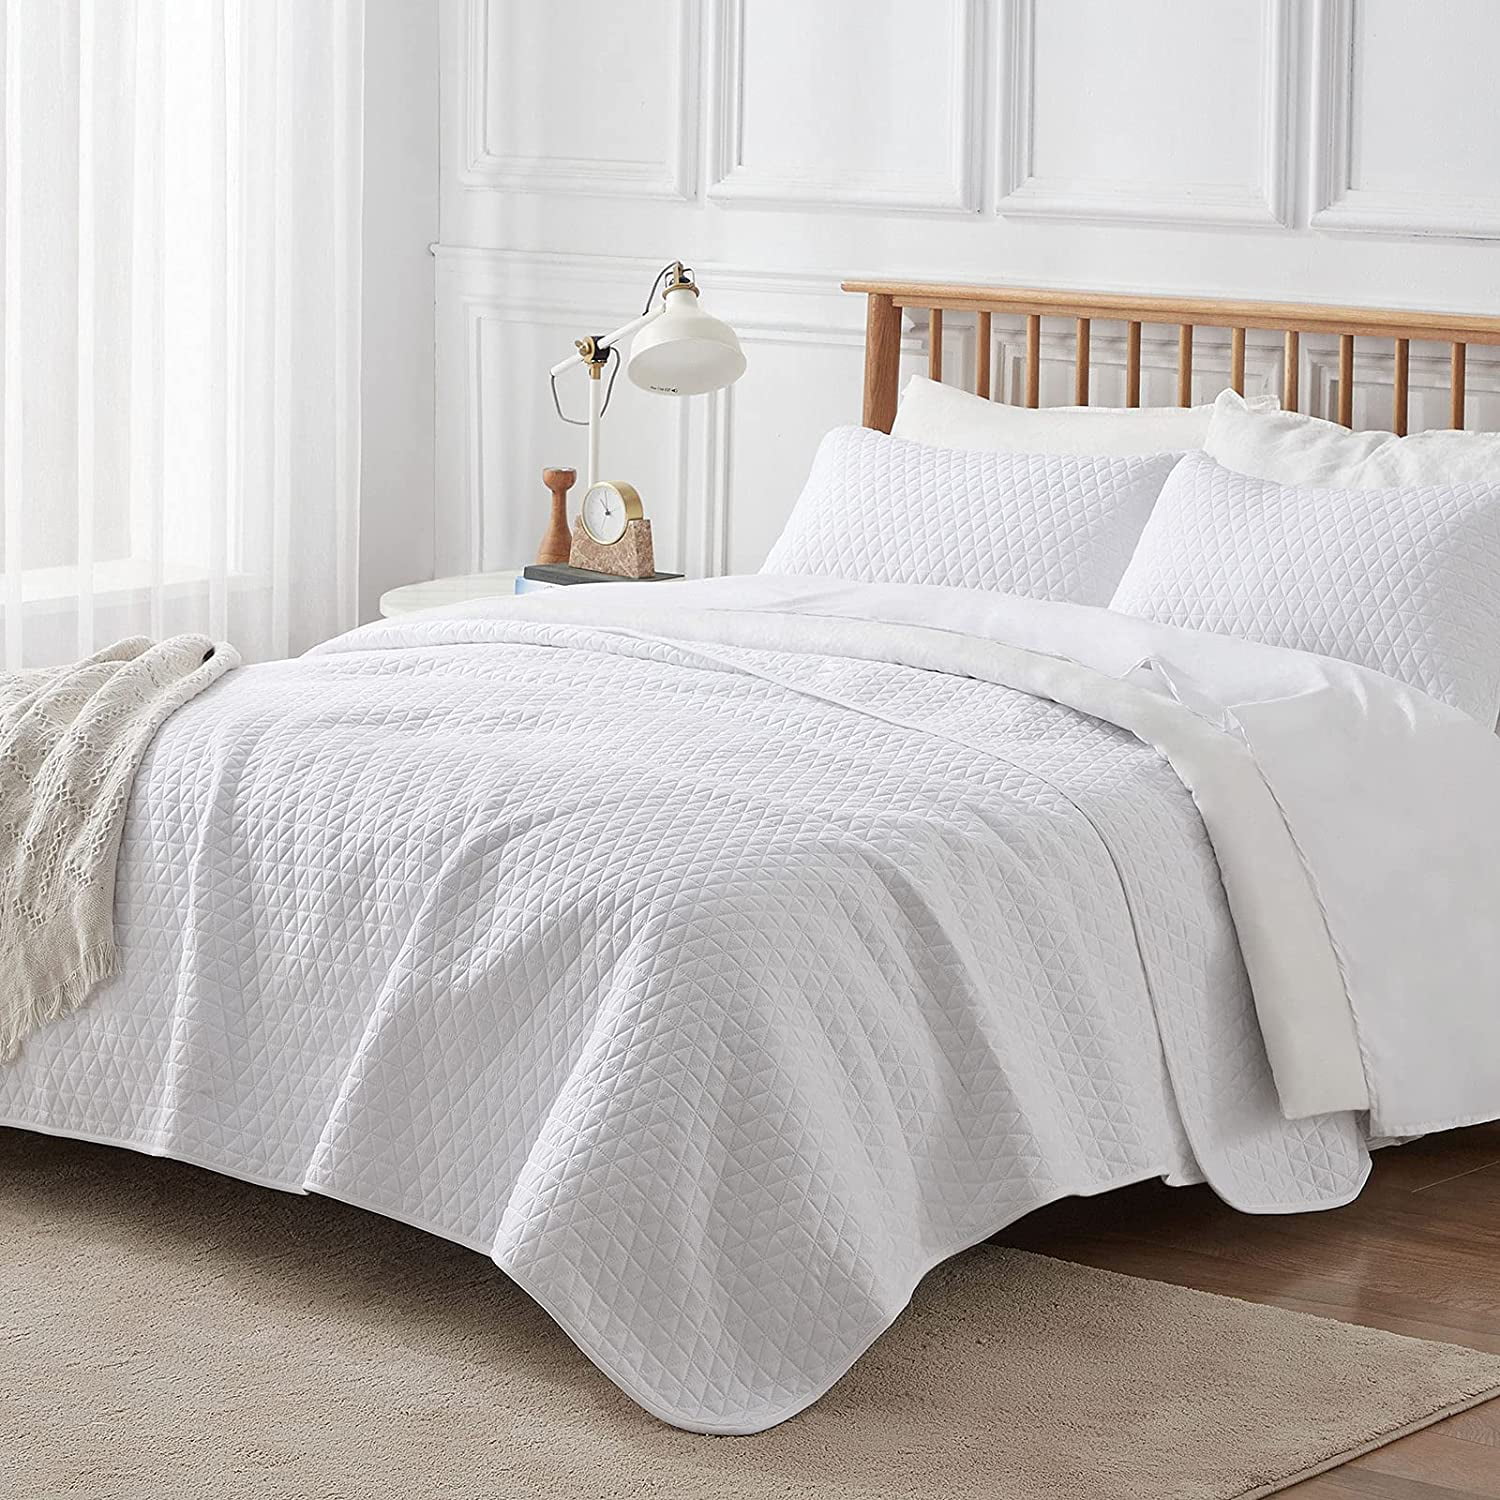 White 1 Quilt 1 Sham Unique Stitches Pattern Quilting Bedspread 2-Piece Lightweight Coverlet for All Season VEEYOO Bedspread Single 172x249cm 